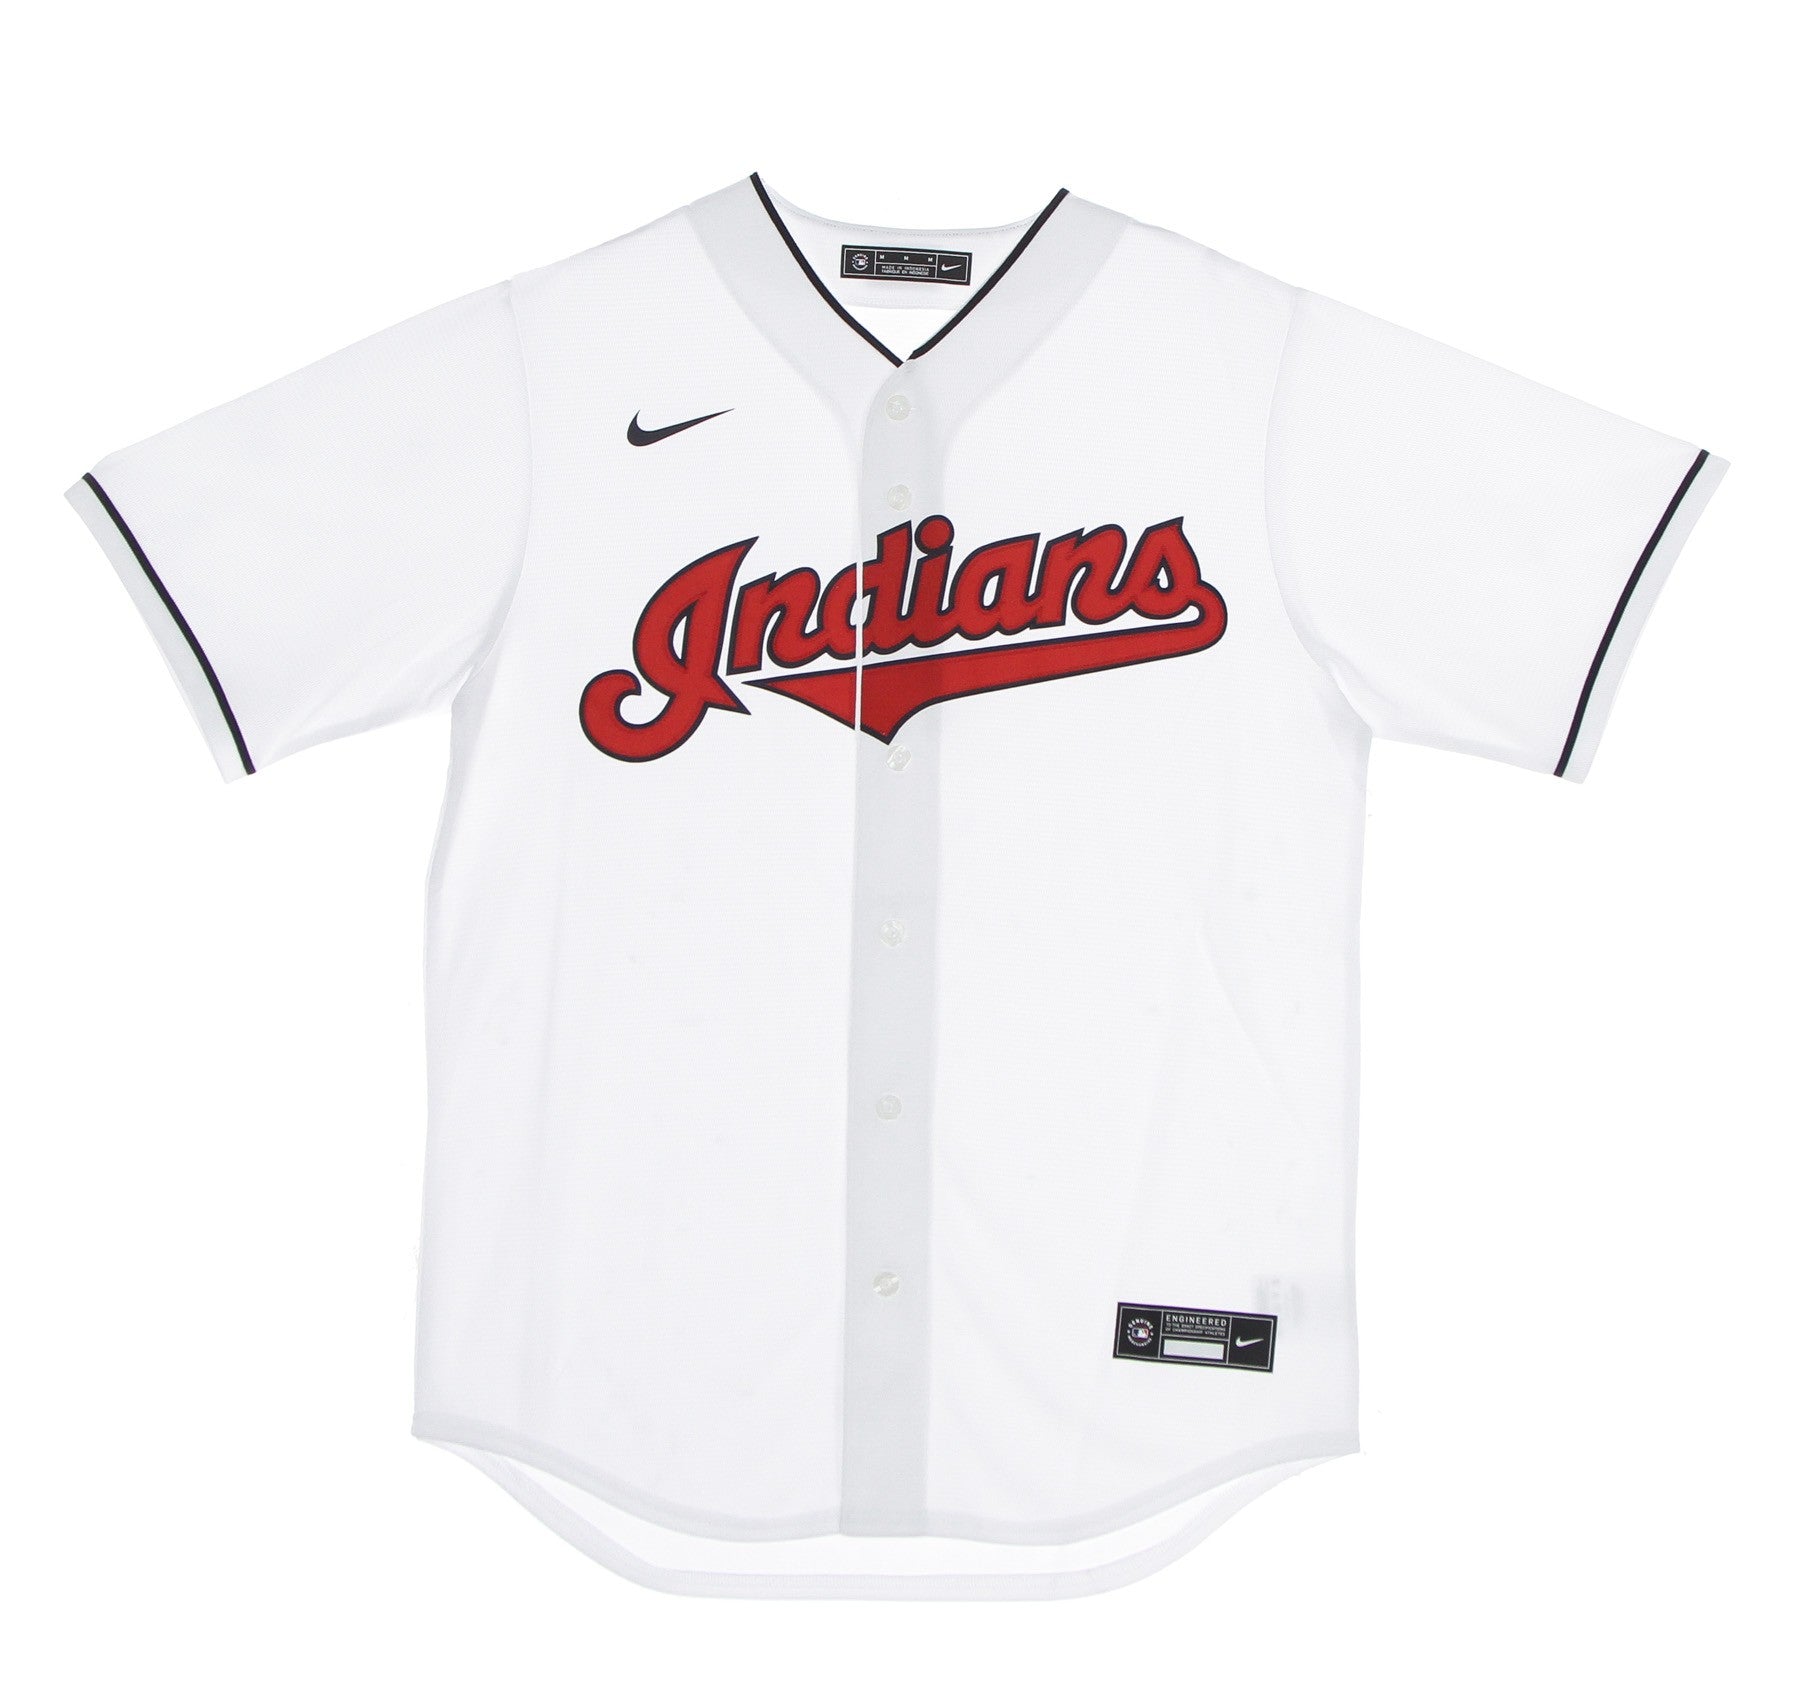 Casacca Baseball Uomo Mlb Official Replica Jersey Cleind Home White